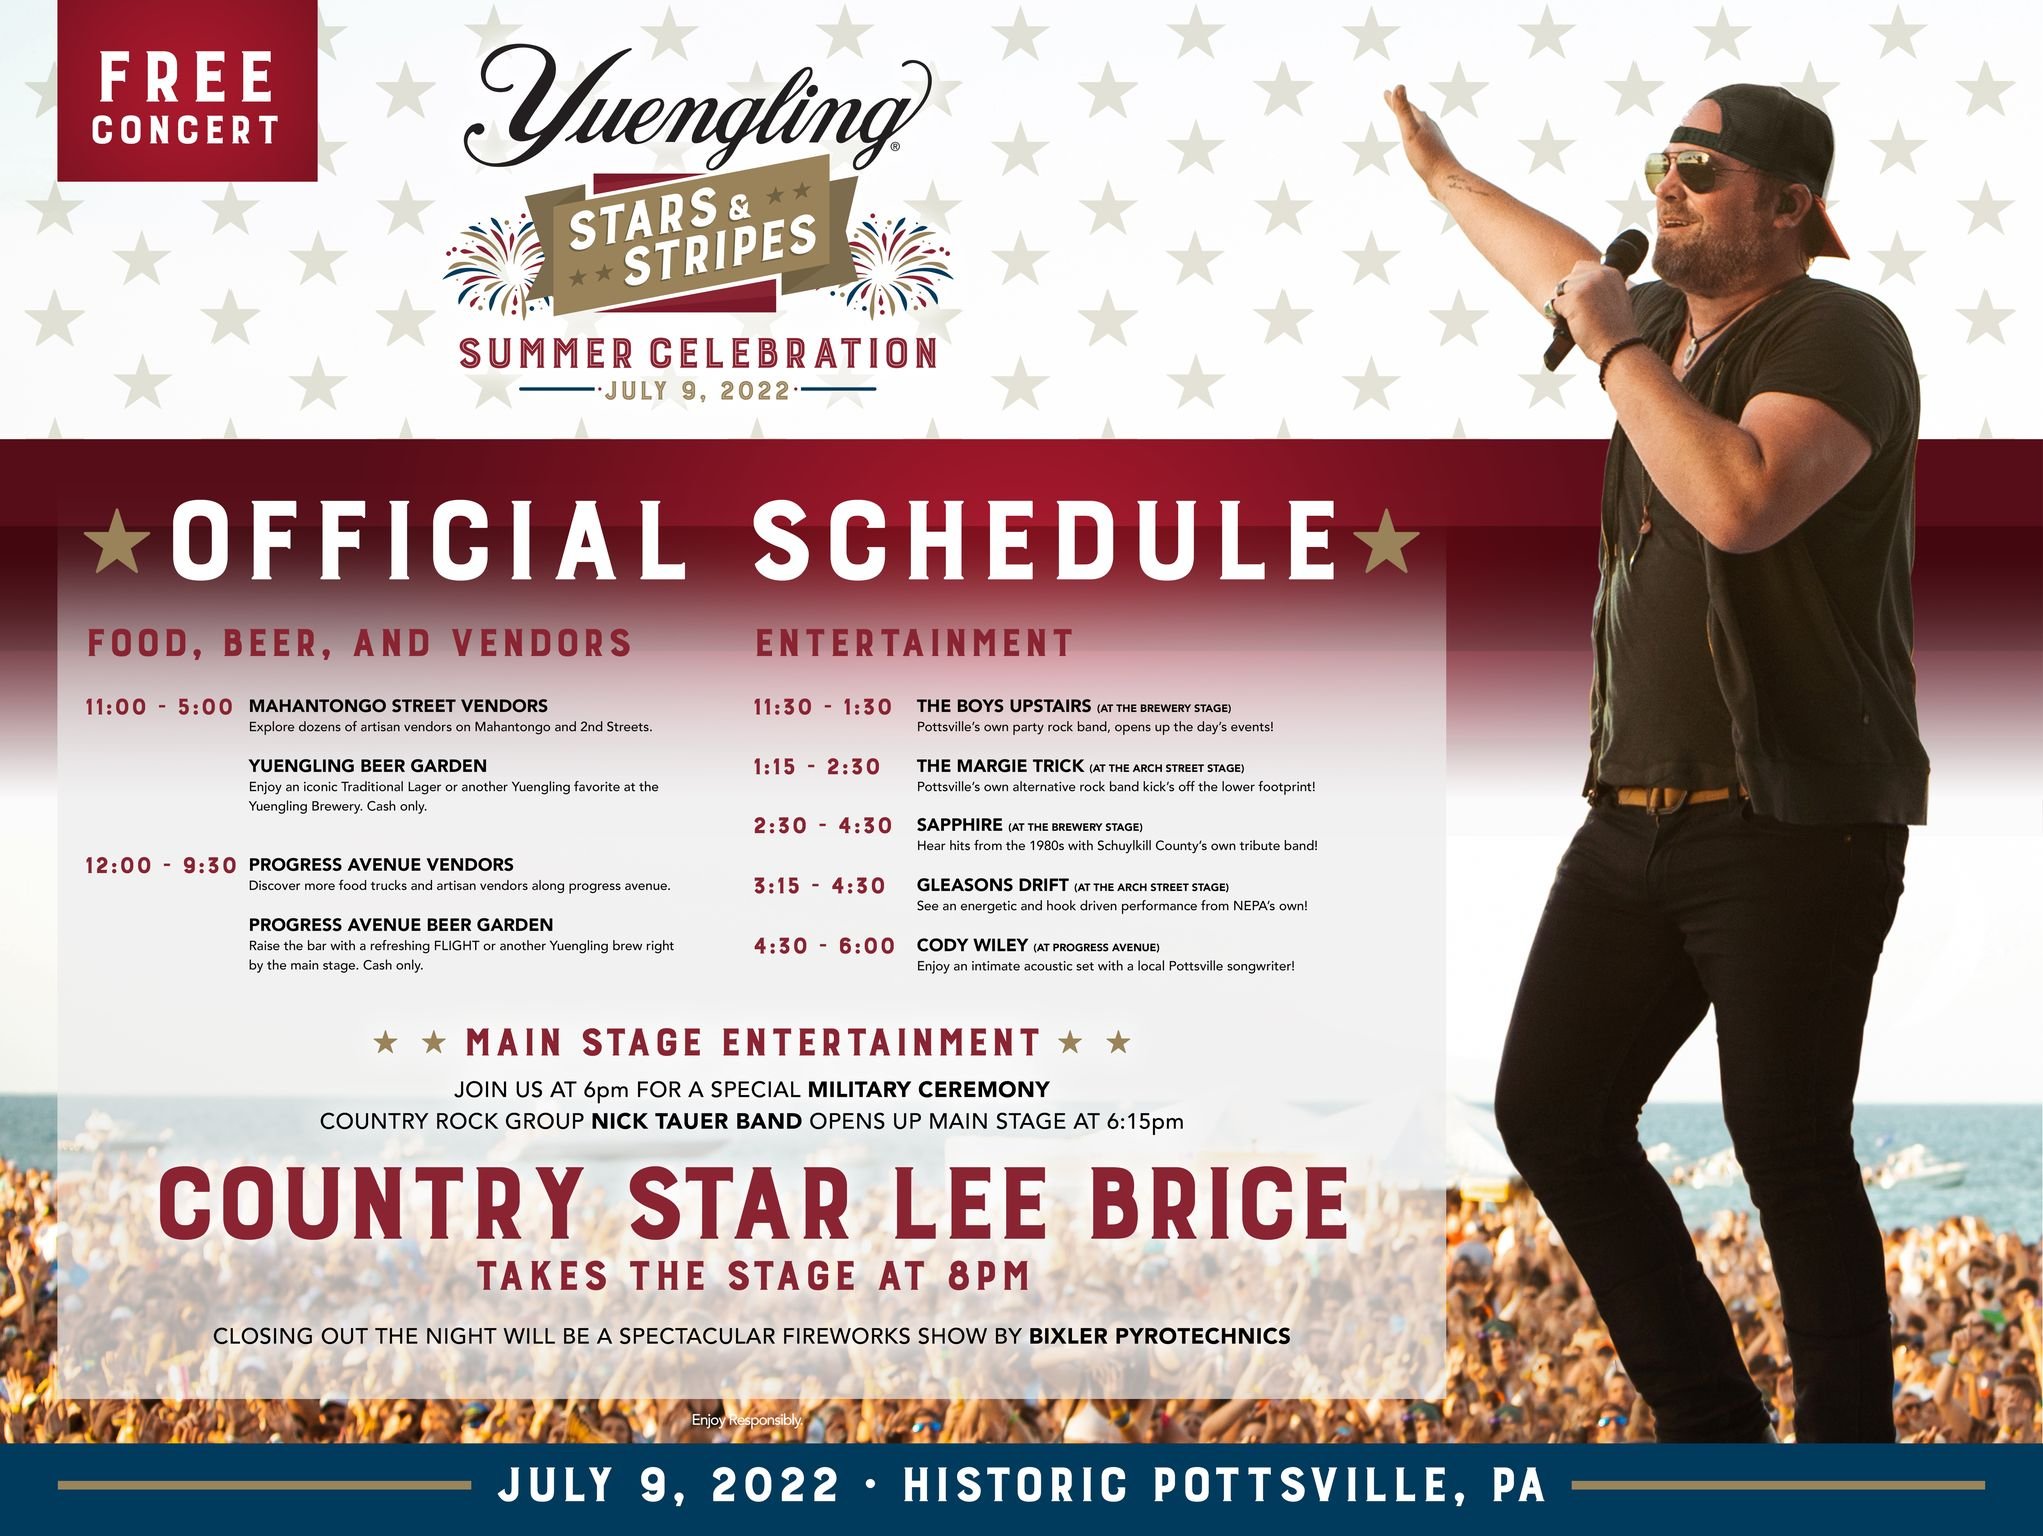 Entertainment Lineup for This Weekend's Yuengling Stars & Stripes